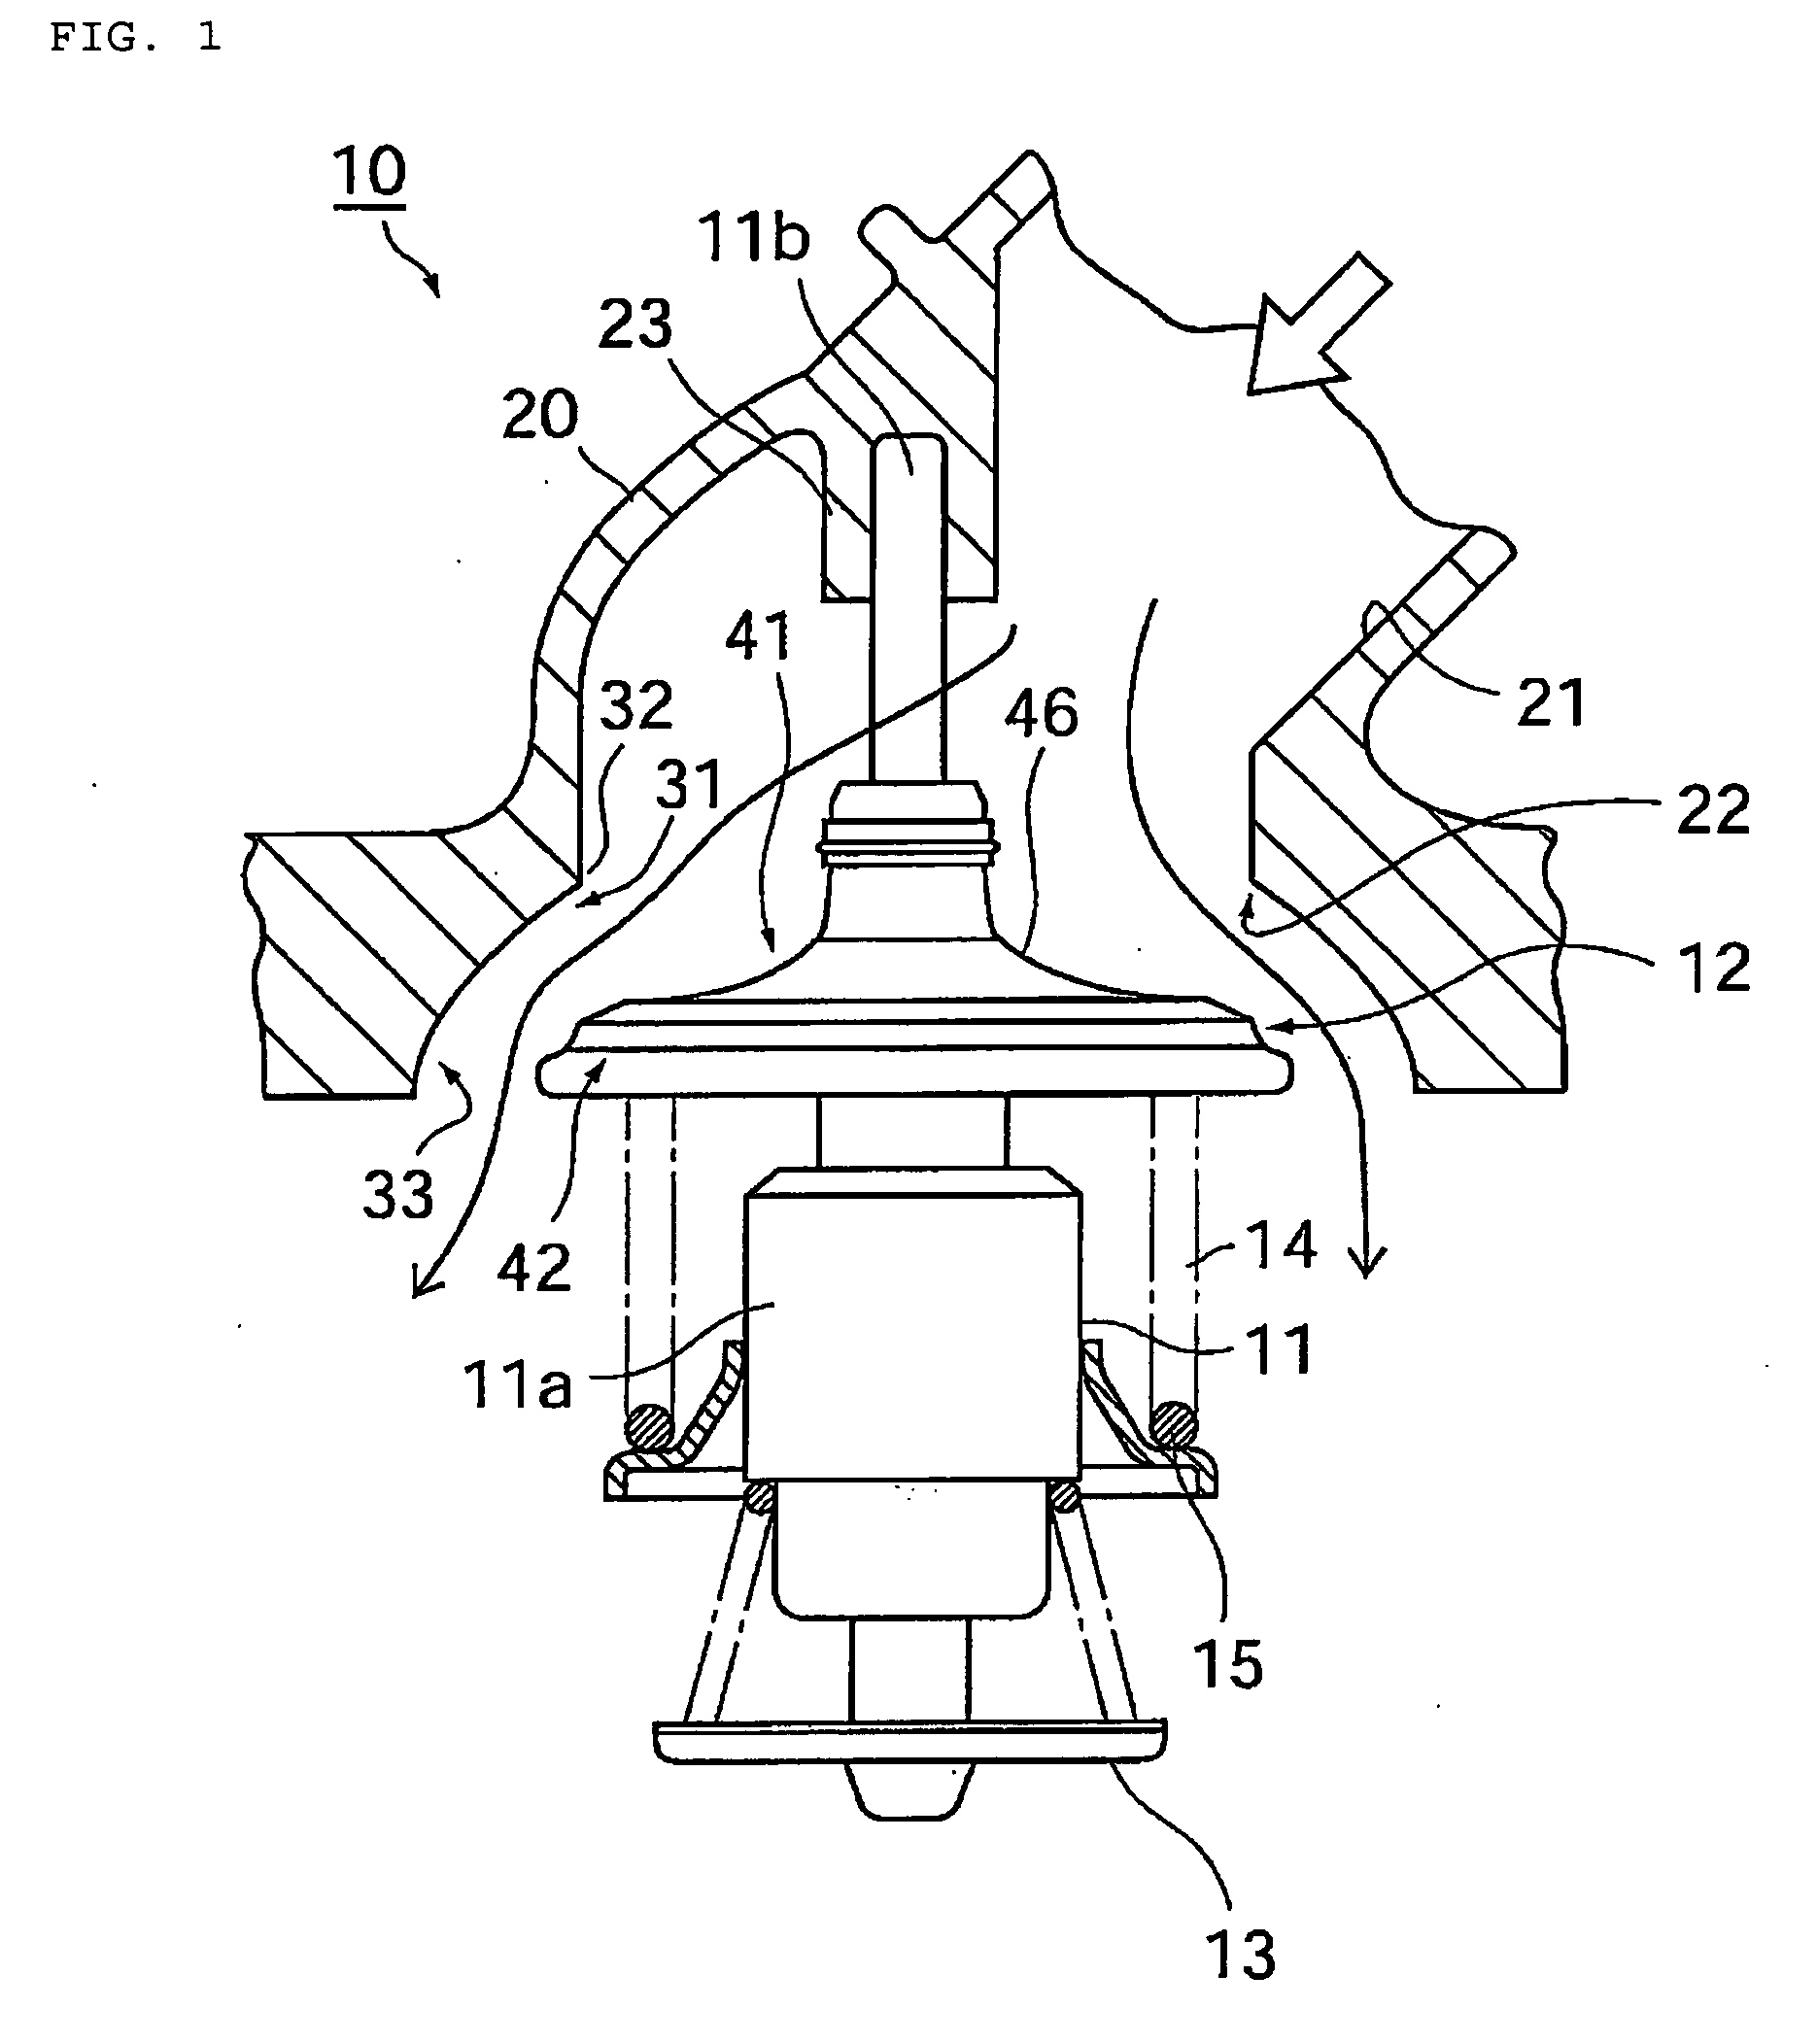 Thermostat device